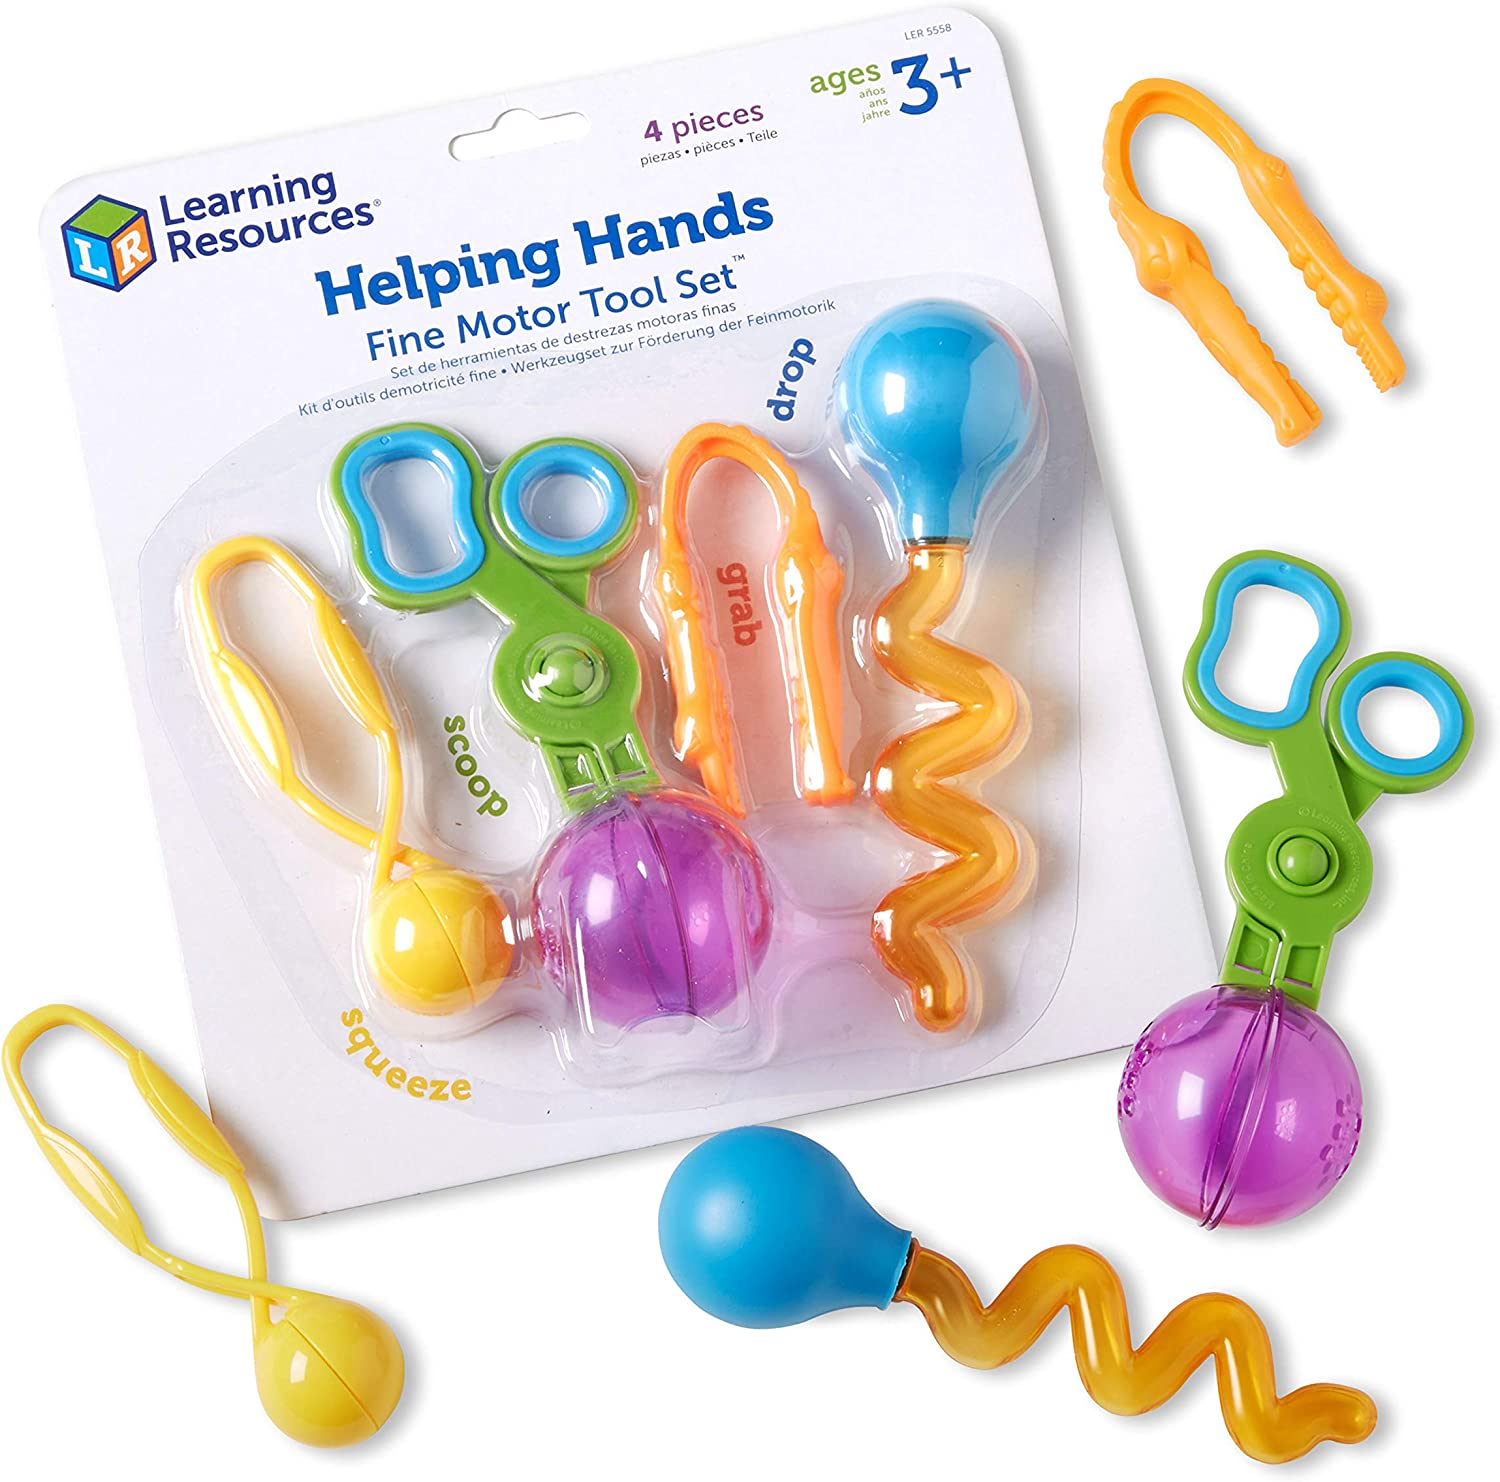 Helping Hands Fine Motor Tool Set, Get a grip on fine motor skills and keep young learners entertained with these four handy tools. The Helping Hands Fine Motor Tool Set from Learning resources is the perfect collection of tools to help develop fine motor skills.This handy set includes a selection of best selling Learning Resources Fine Motor Skills Tools! Made from durable plastic and sized for little hands, these tools are ideal for developing children's muscles for writing and their fine motor skills. Br